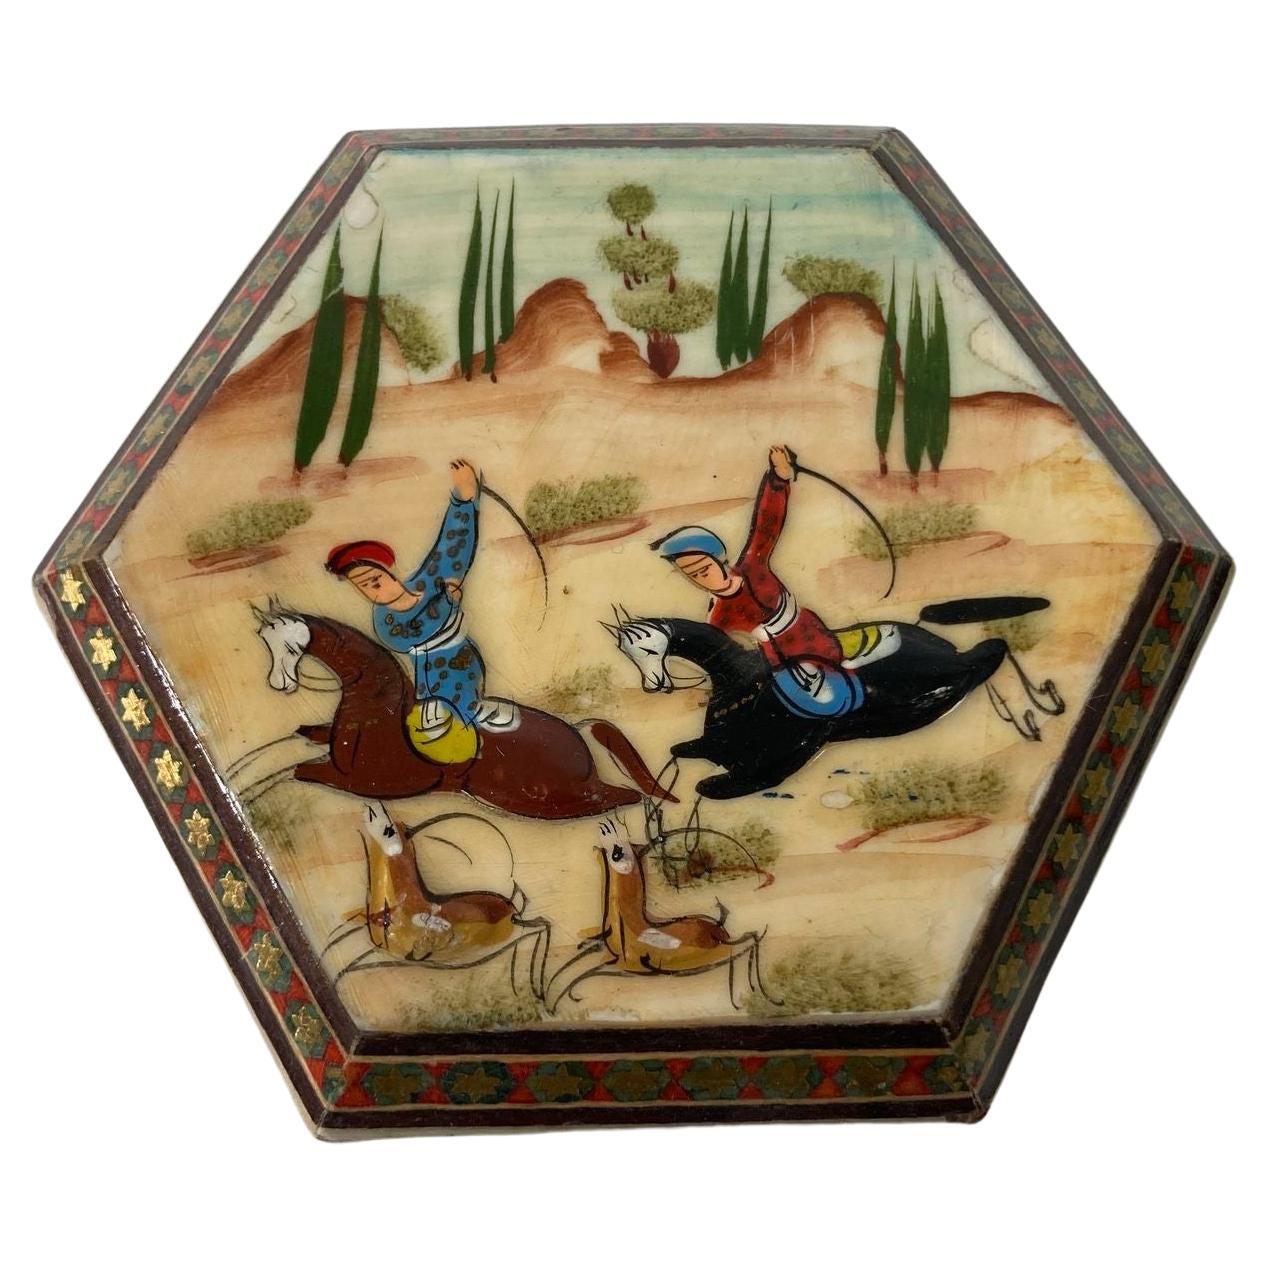 Vintage Middle Eastern Persian Khatam Trinket Box with Miniature Art Painting For Sale